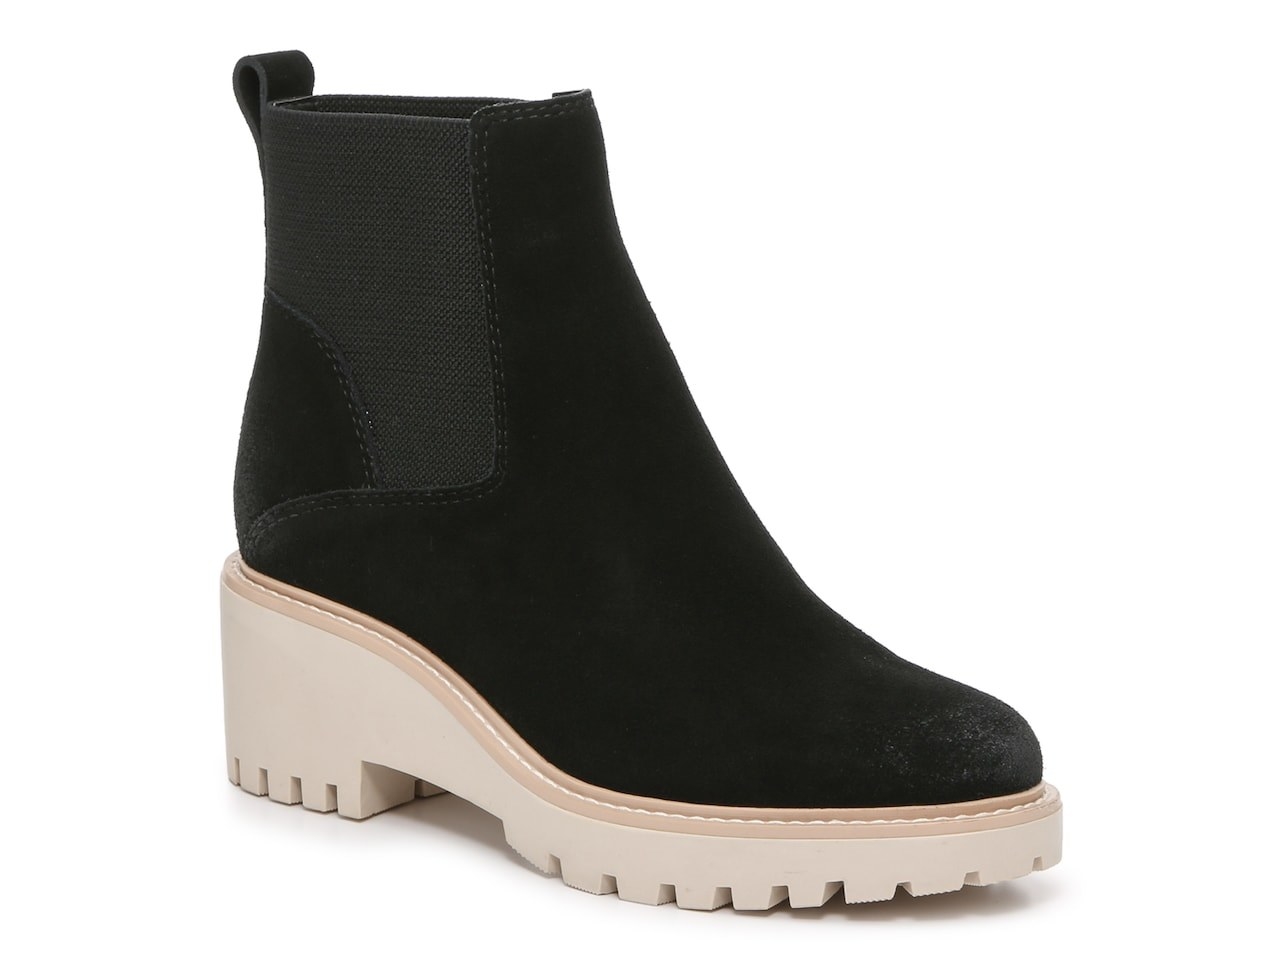 image of black Chelsea boot